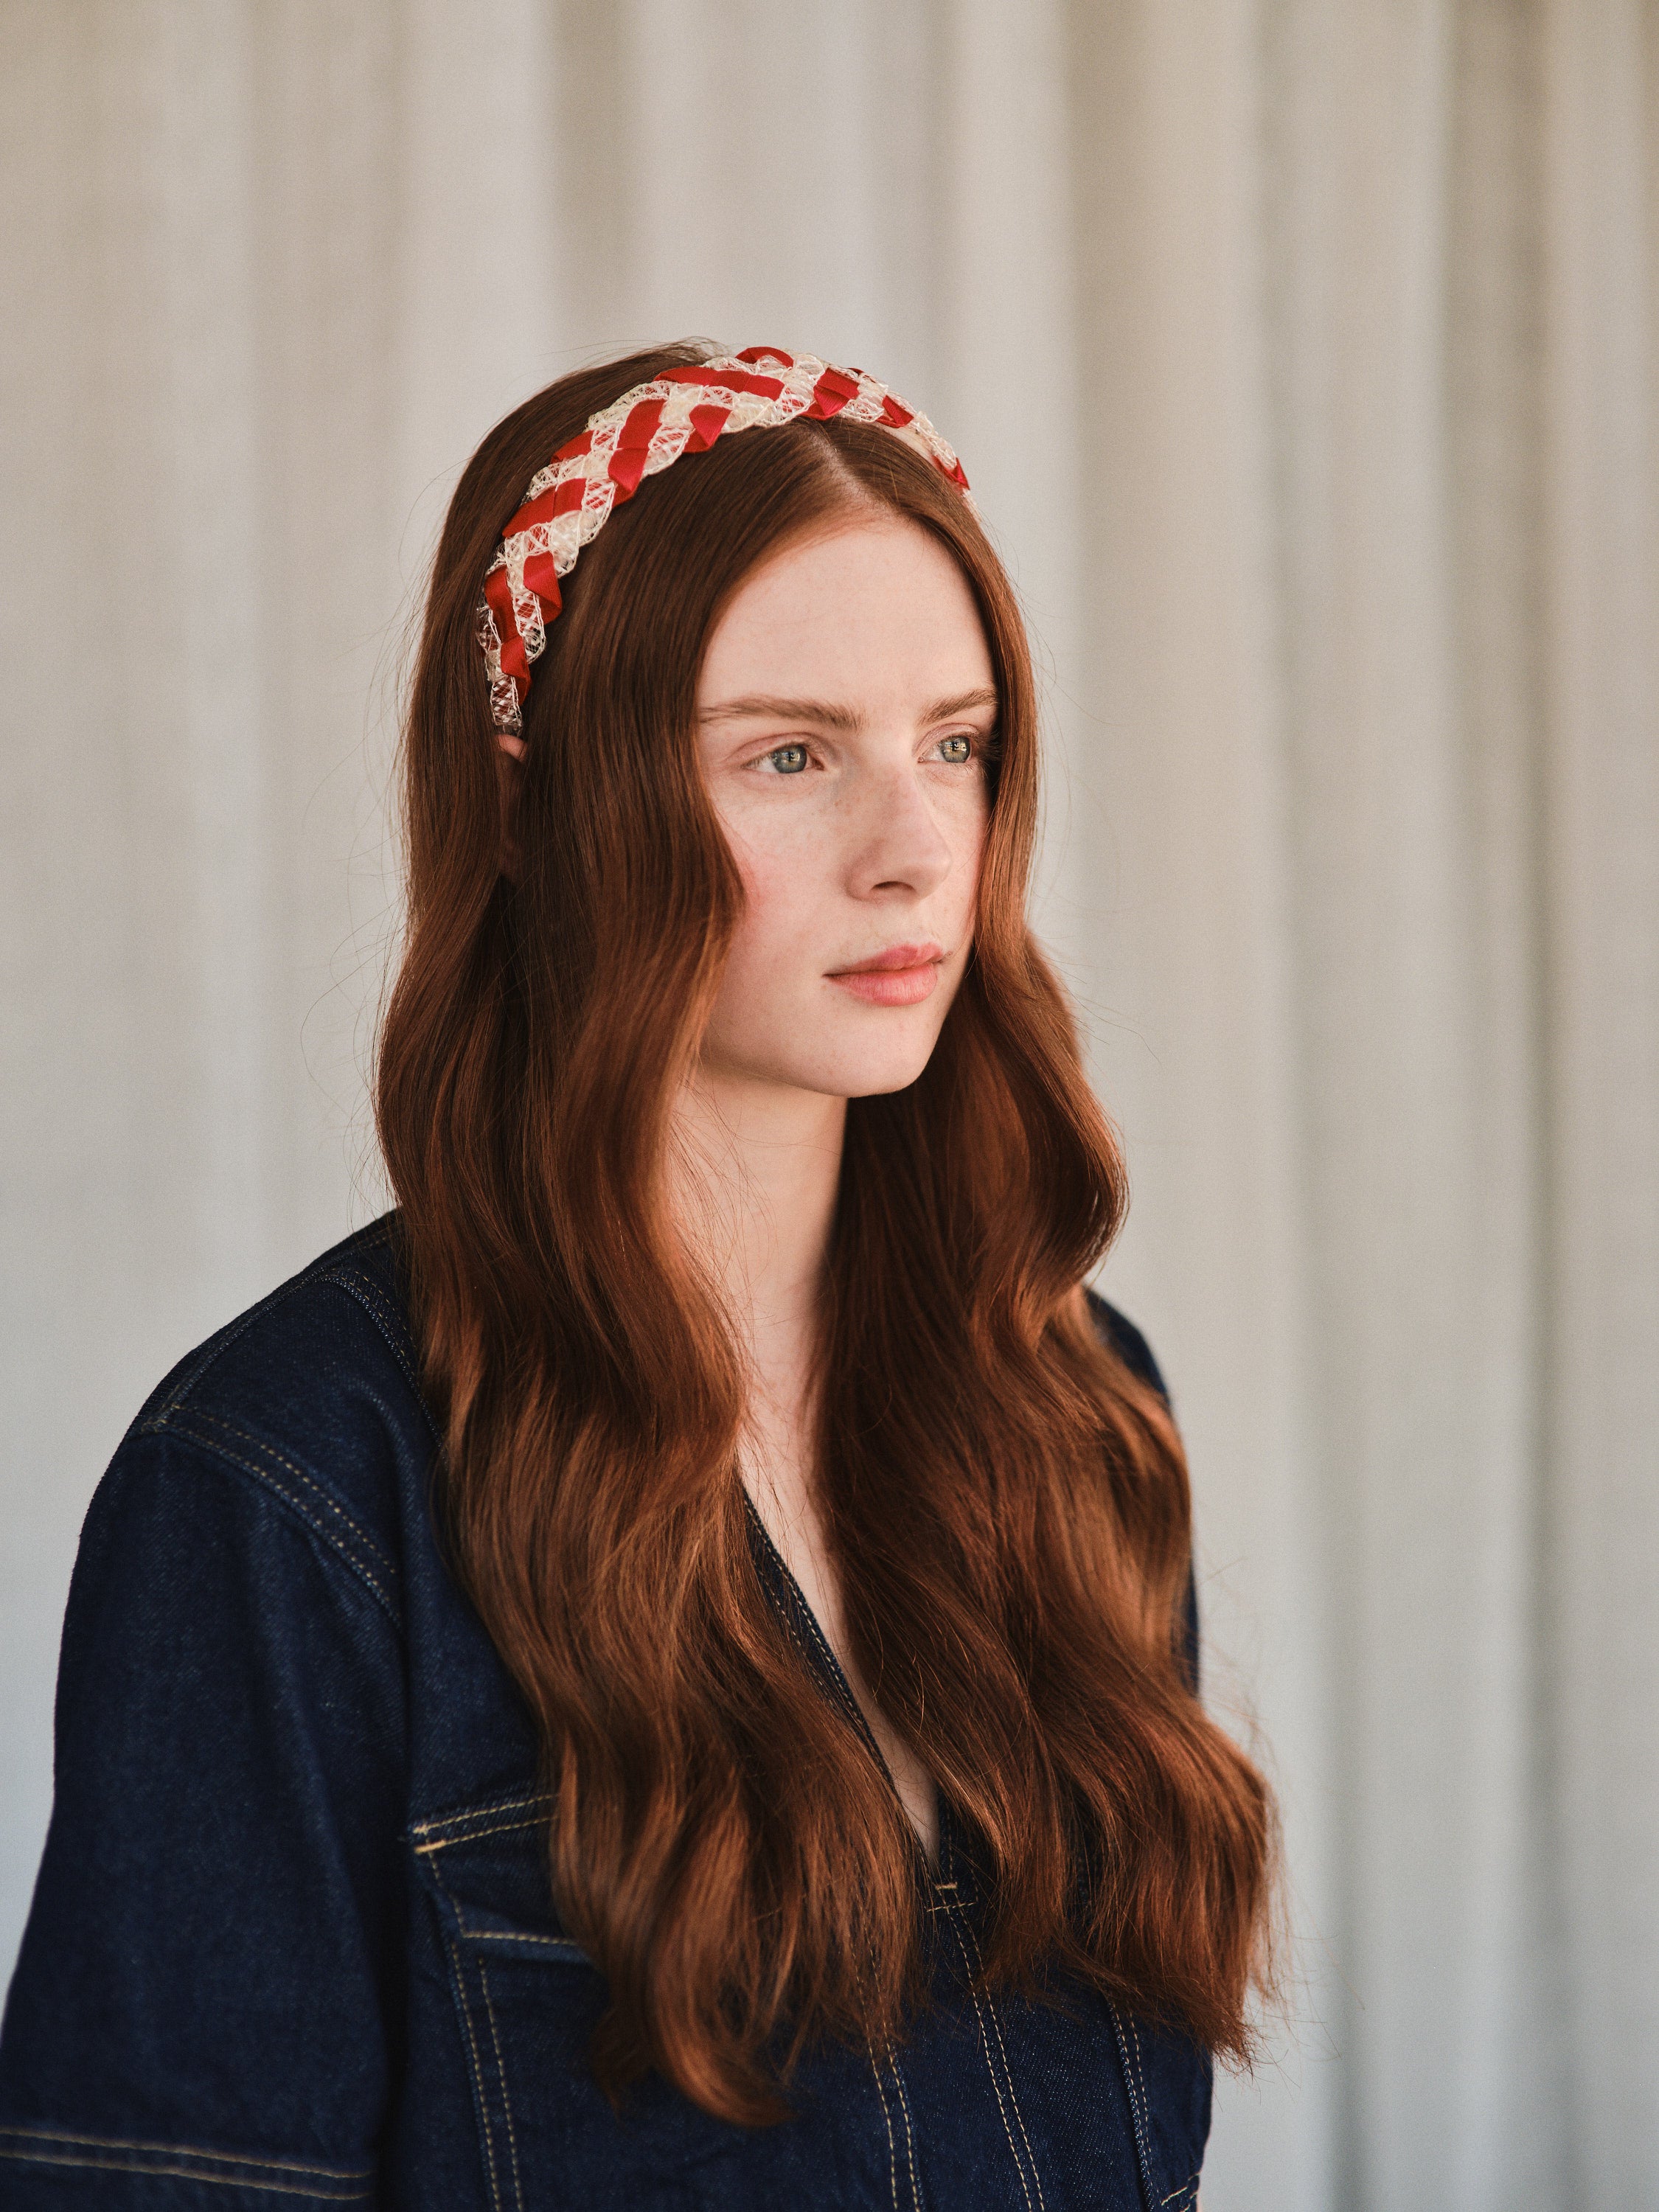 Entwine vintage straw headband - Red and white